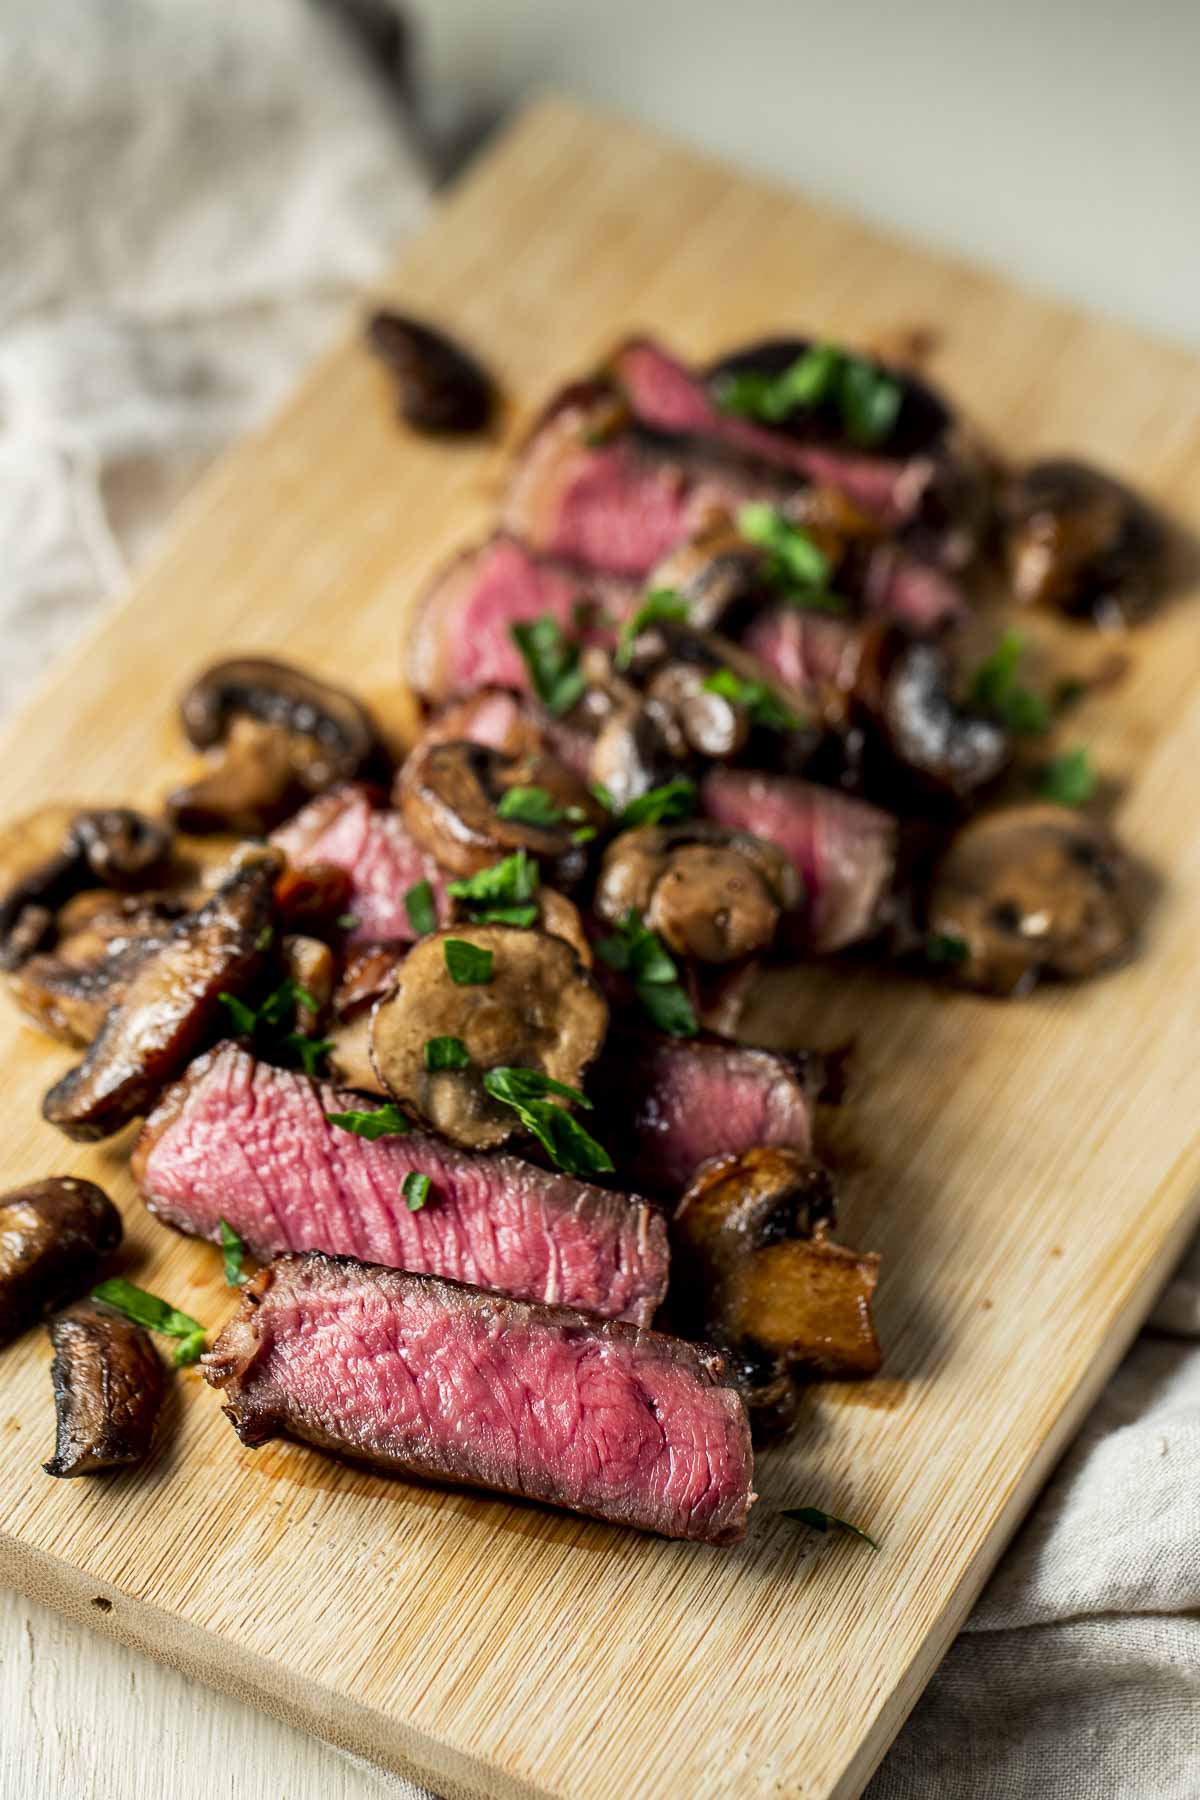 Sirloin steak cut into slices on a wooden board and topped with mushroom sauce.